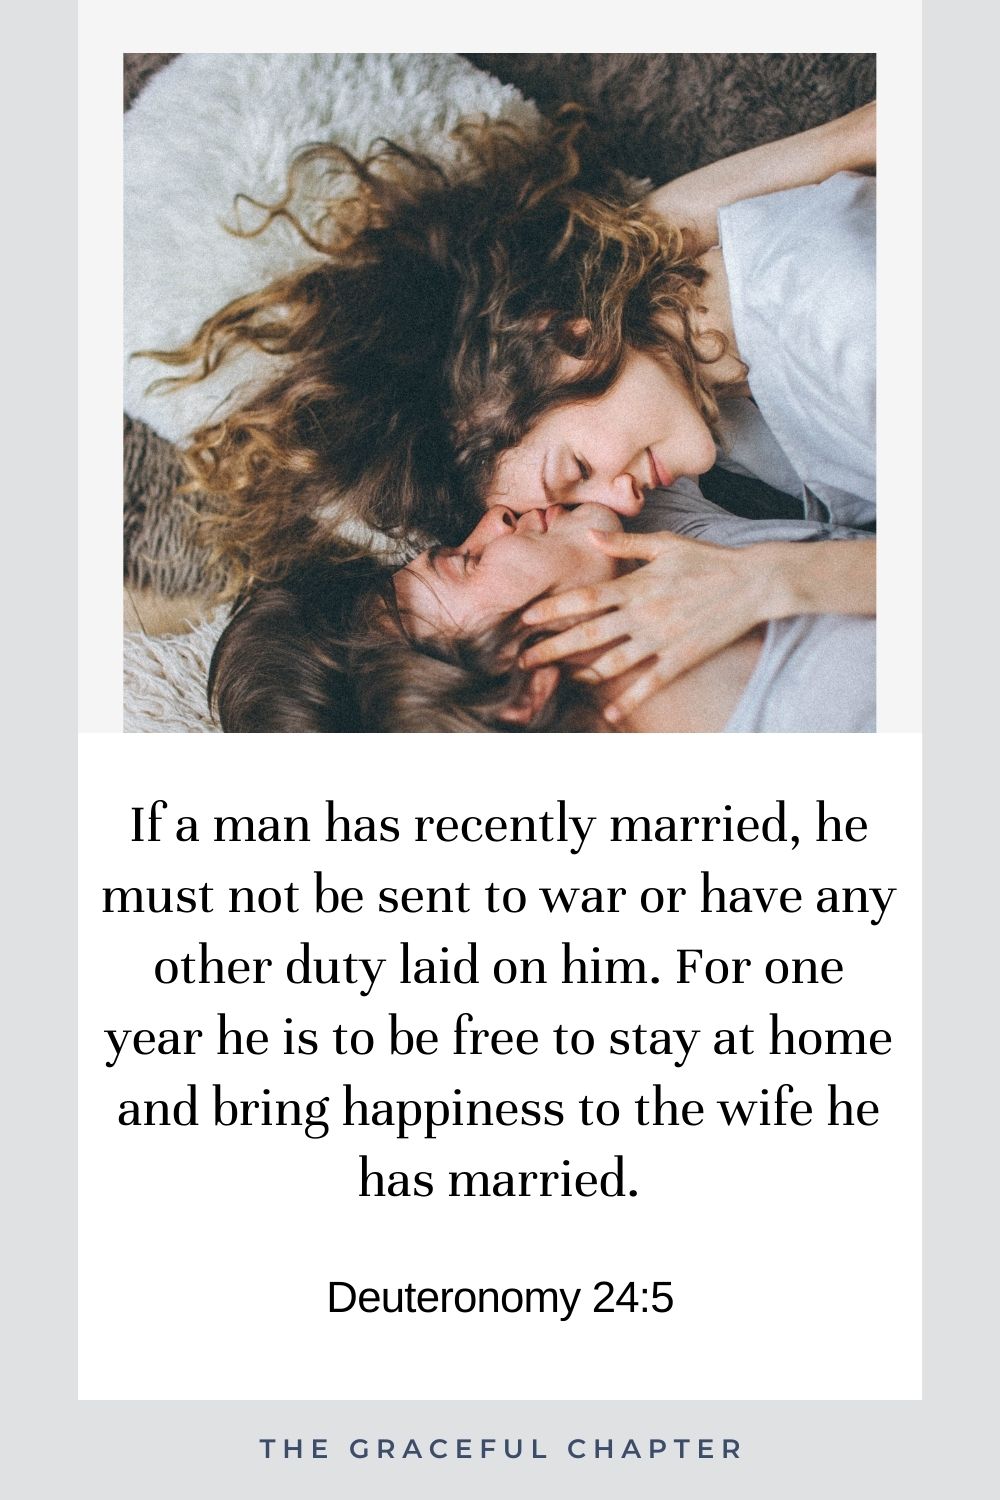 If a man has recently married, he must not be sent to war or have any other duty laid on him. For one year he is to be free to stay at home and bring happiness to the wife he has married. Deuteronomy 24:5